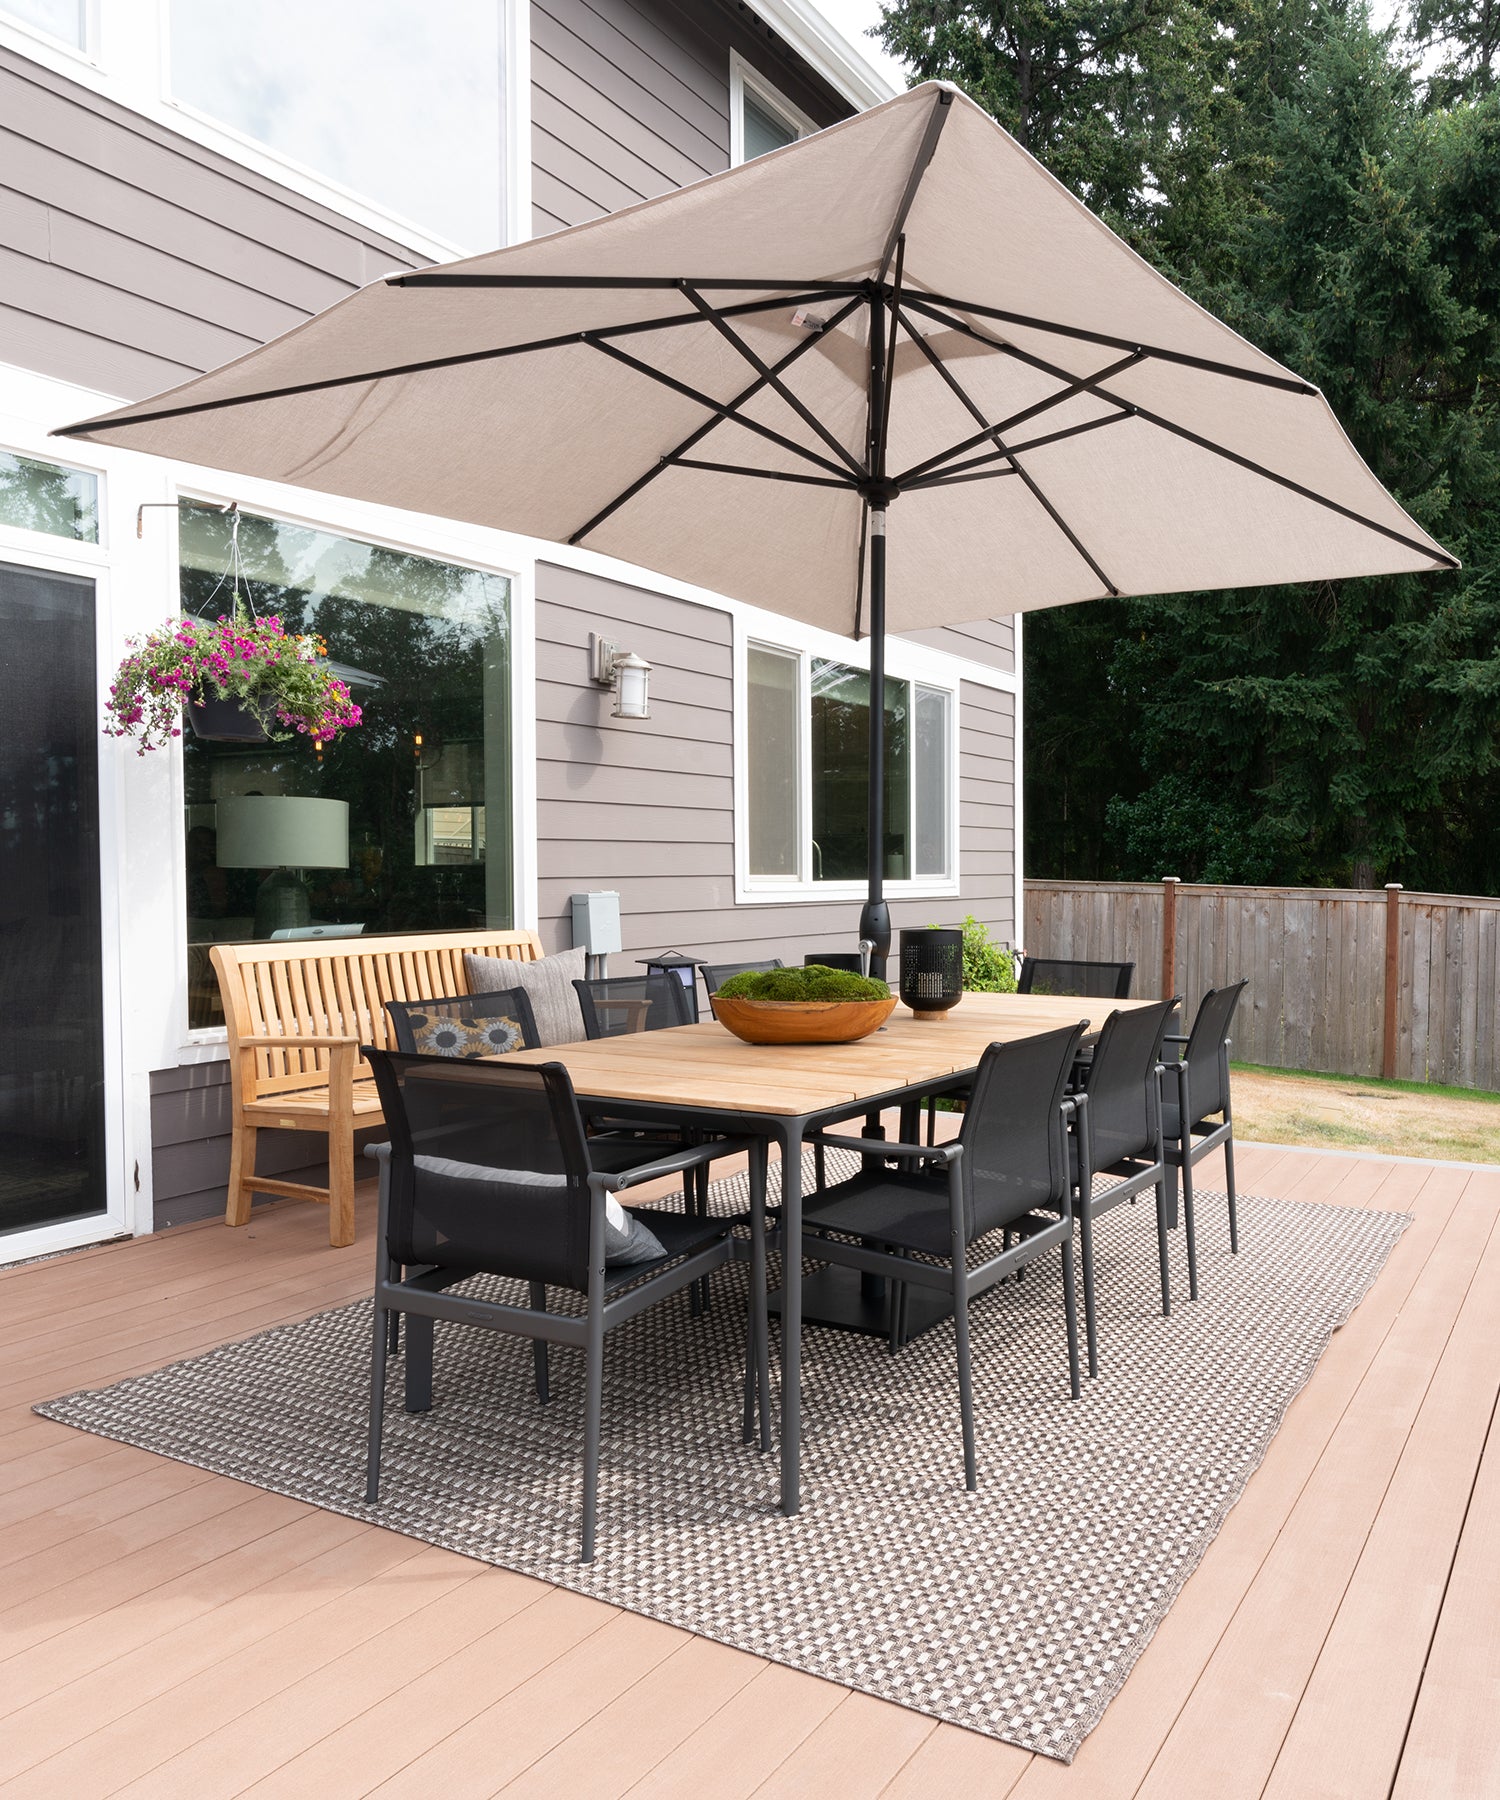 Black outdoor dining chairs surrounding a teak outdoor dining table under an umbrella on a large porch